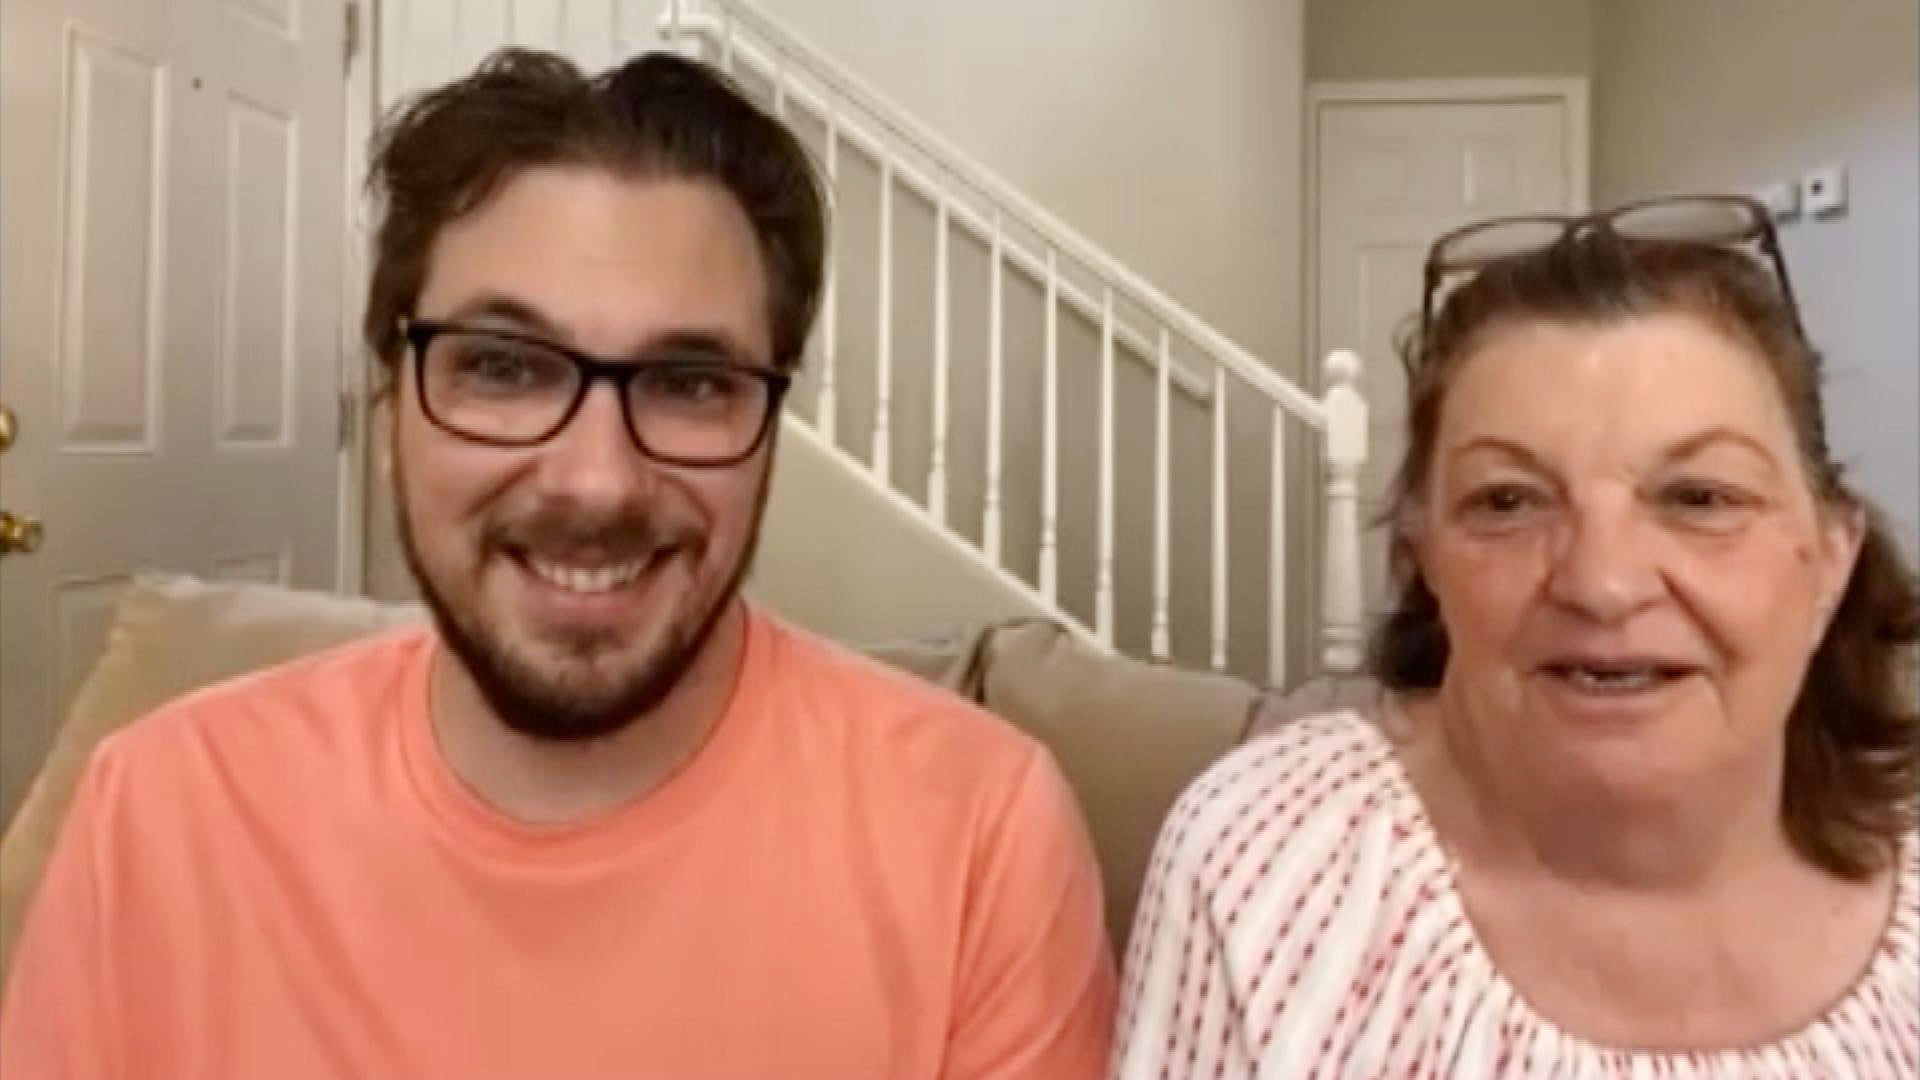 On 90 Day Fiancé, we have seen Colt and Debbie Johnson go through pretty mu...